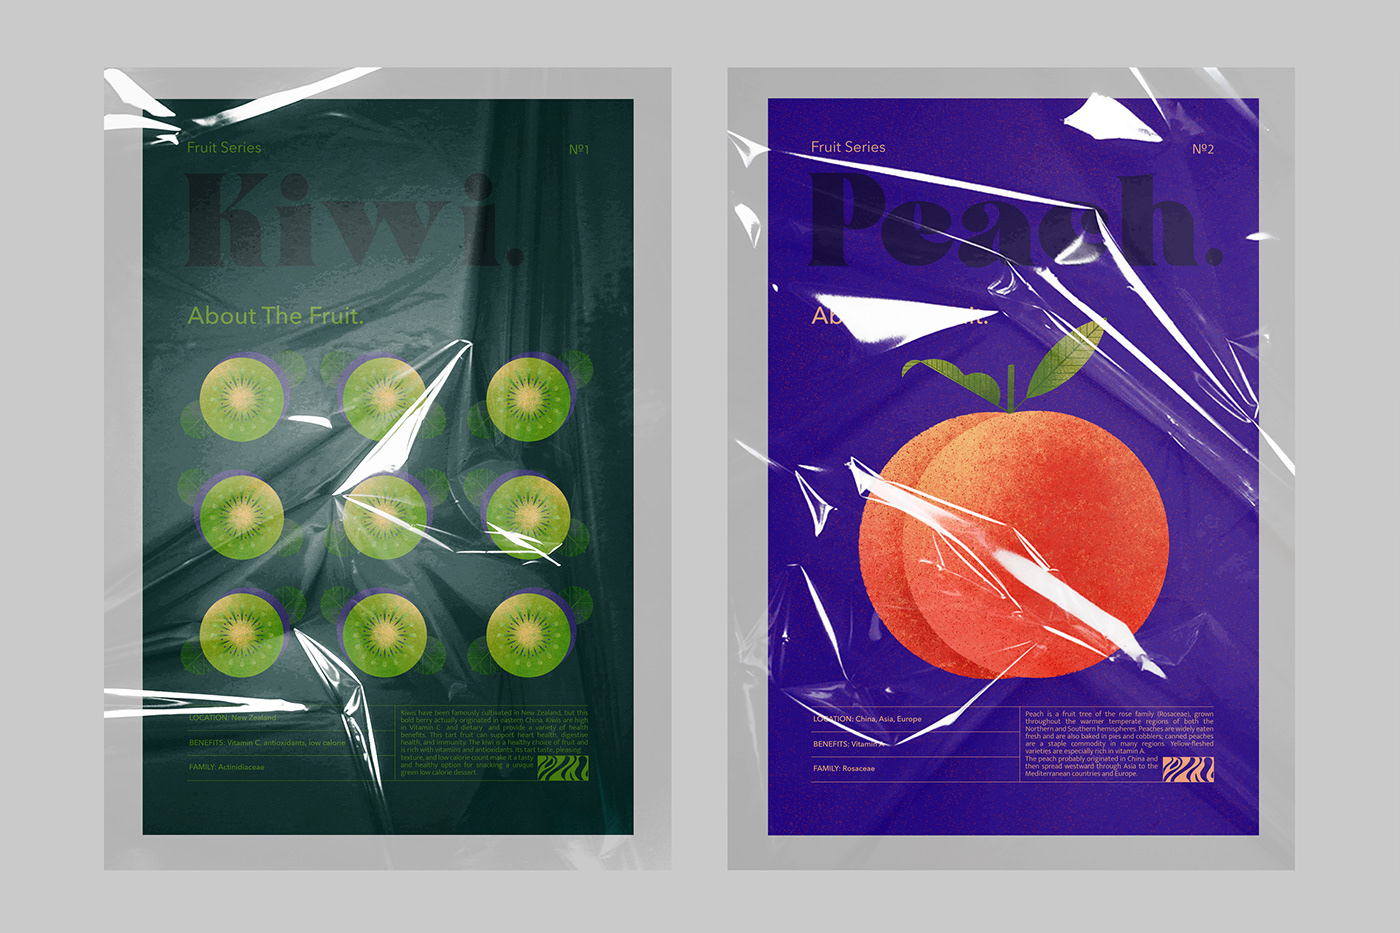 Posters that describe fruits, their history, and benefits for health.